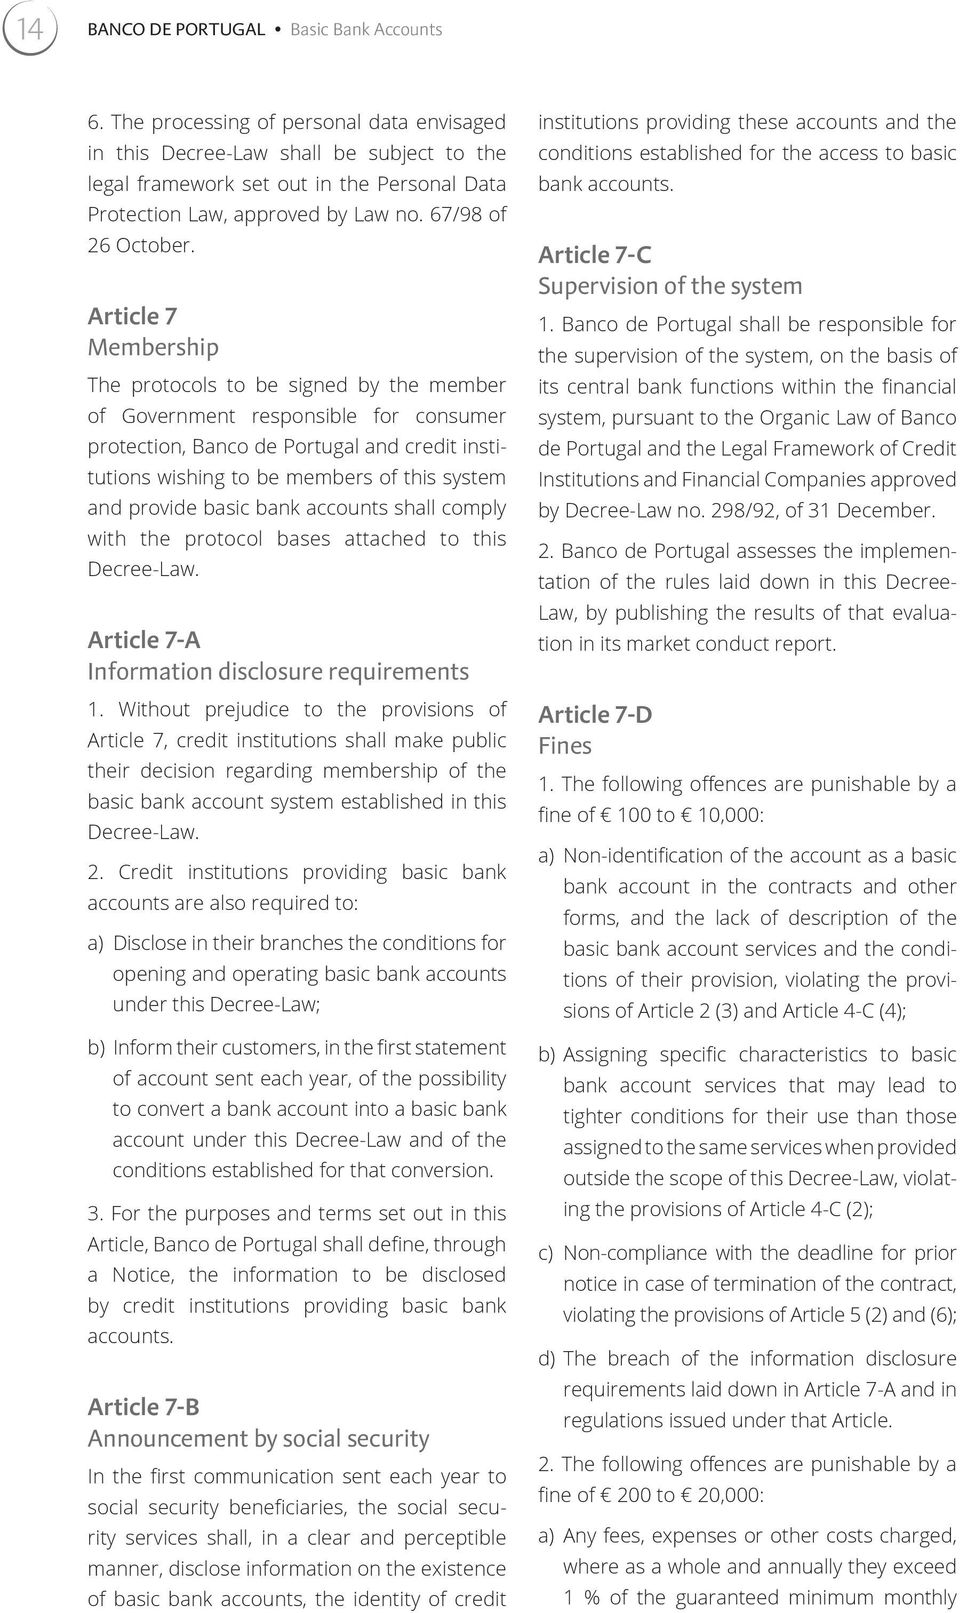 Article 7 Membership The protocols to be signed by the member of Government responsible for consumer protection, Banco de Portugal and credit institutions wishing to be members of this system and